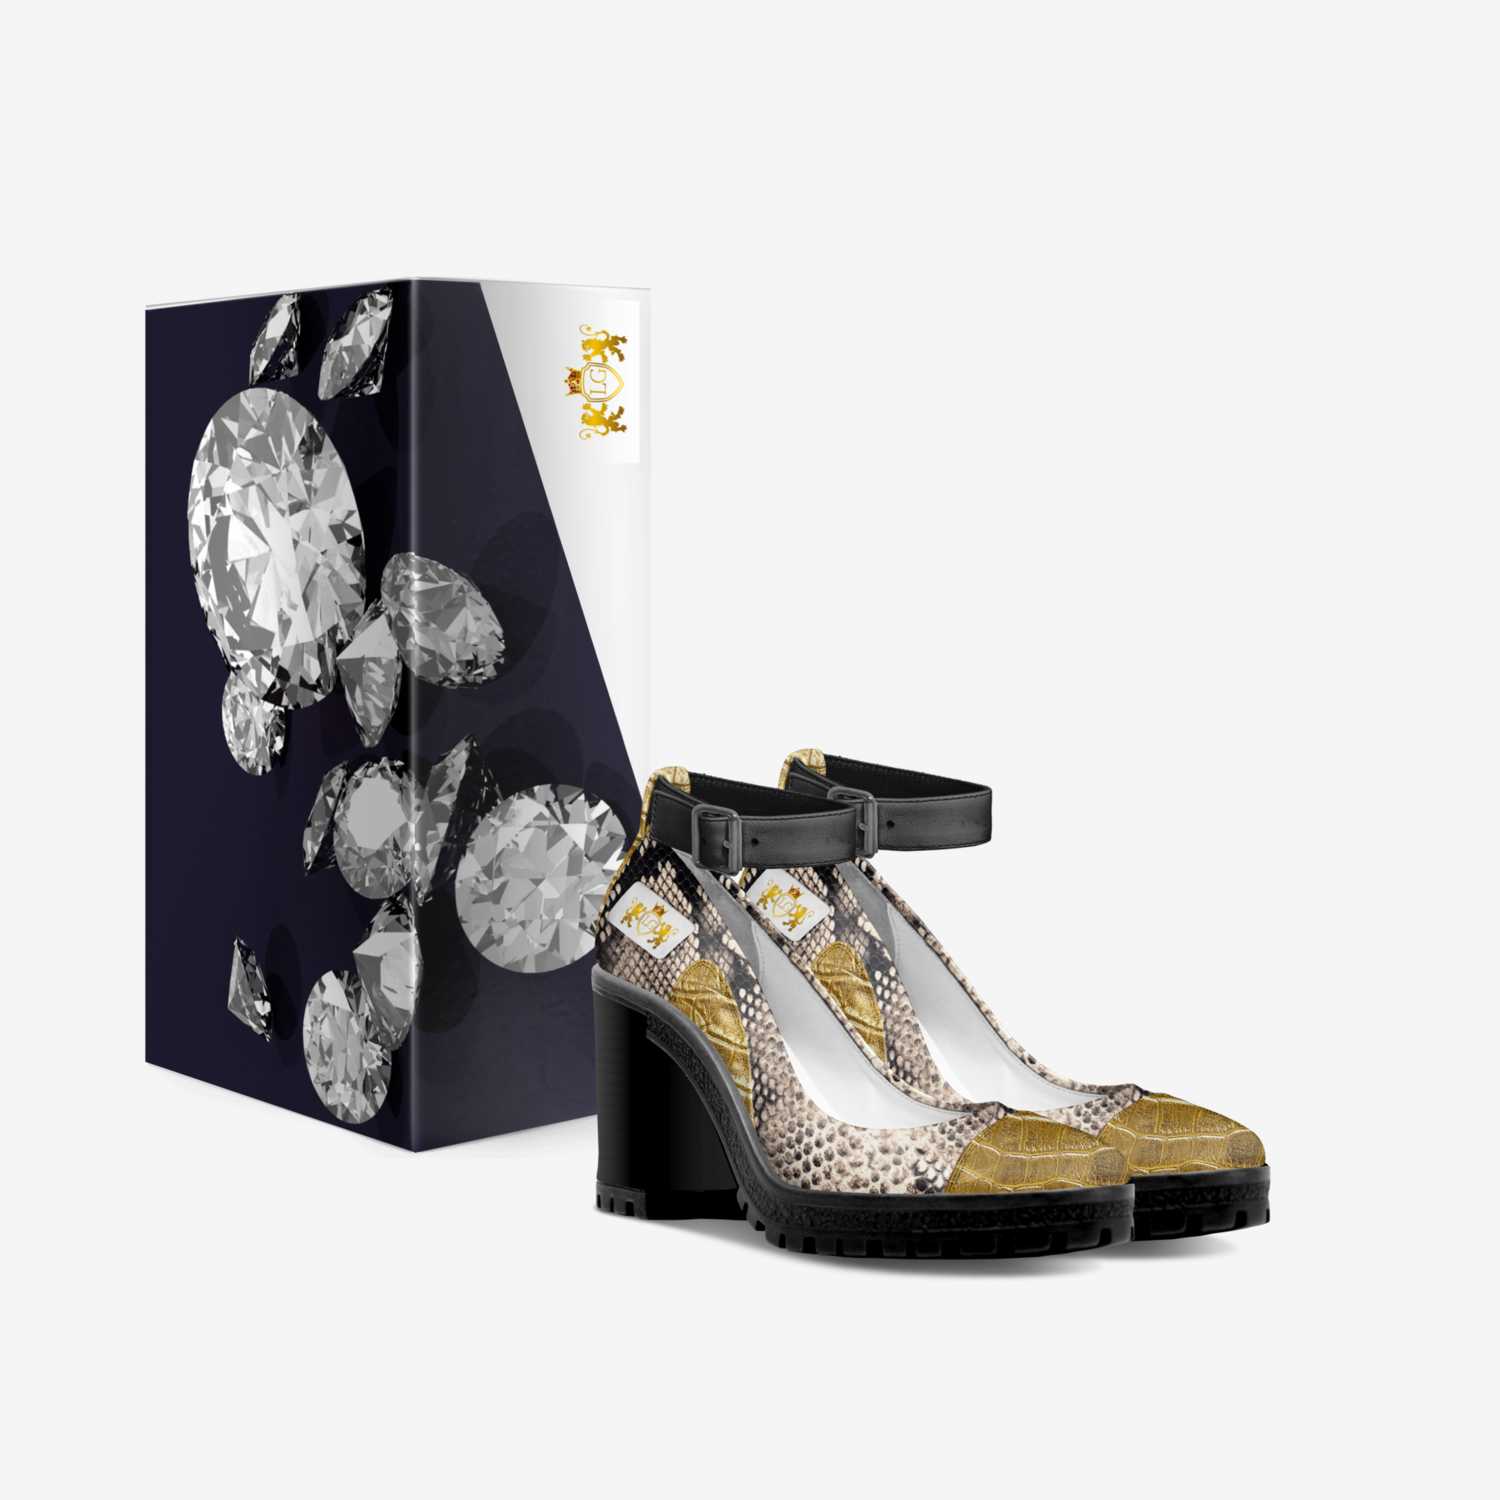 LG ladies nightout custom made in Italy shoes by Legrand Whitt | Box view